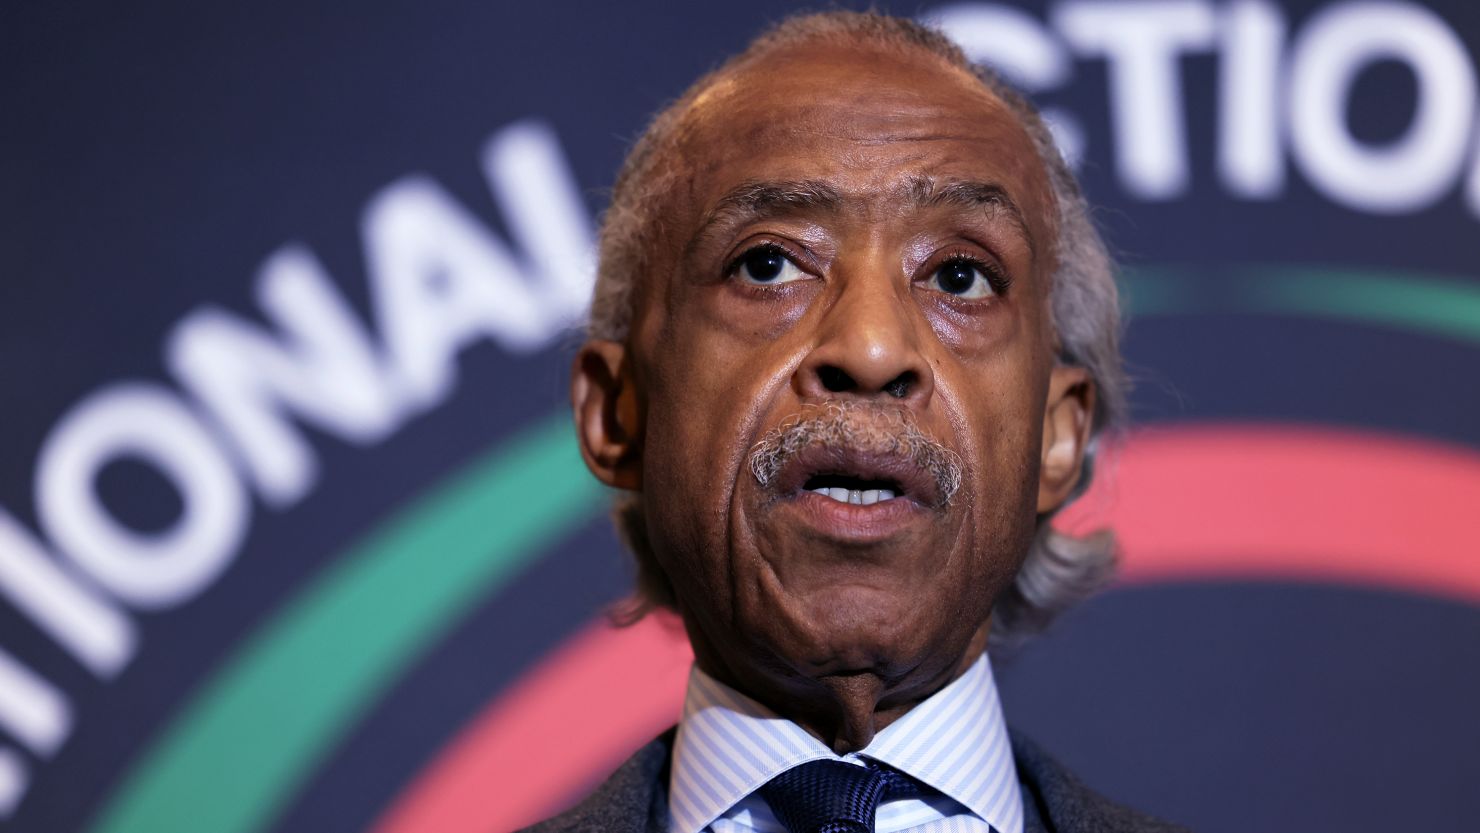 Rev. Al Sharpton, founder and President of National Action Network speaks during a press conference at the Times Square Sheraton hotel on April 6, 2022, in New York City. (Getty Images)